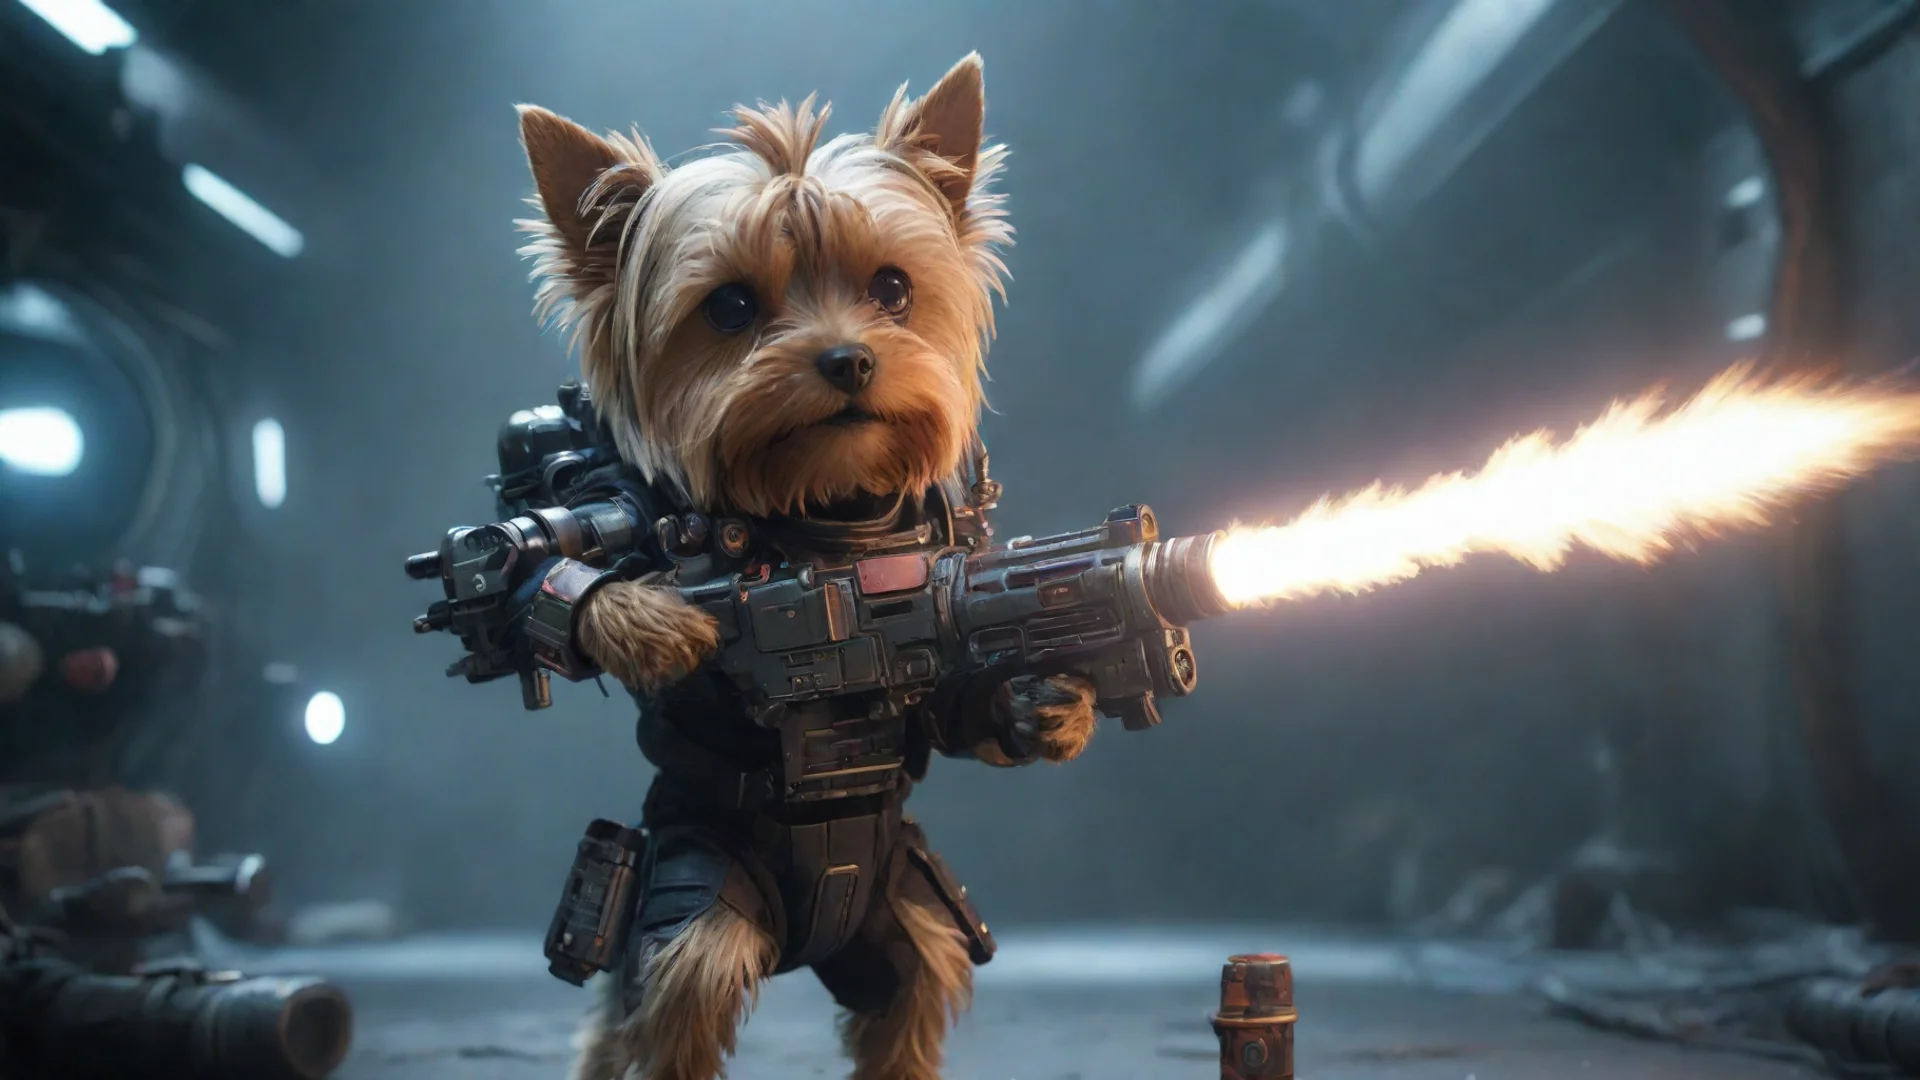 aitrending aione yorkshire terrier in a cyberpunk space suit firing big weapon lot lighting good looking fantastic 1 wide